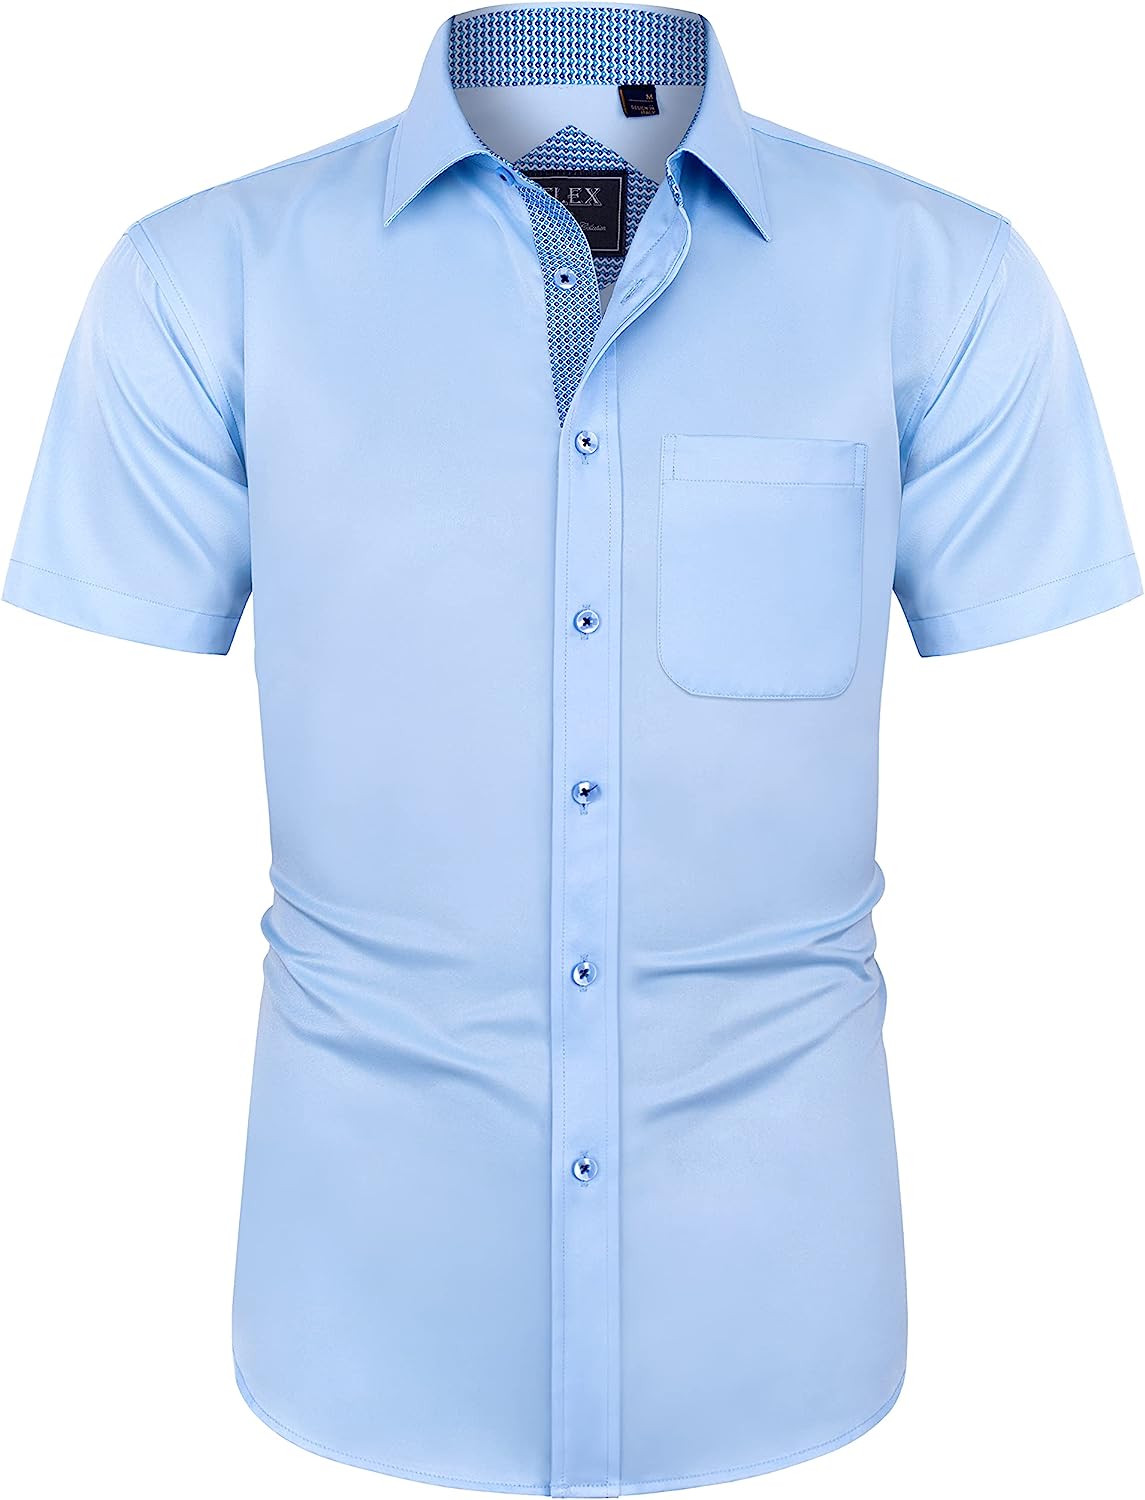 men's casual button up short sleeve shirts